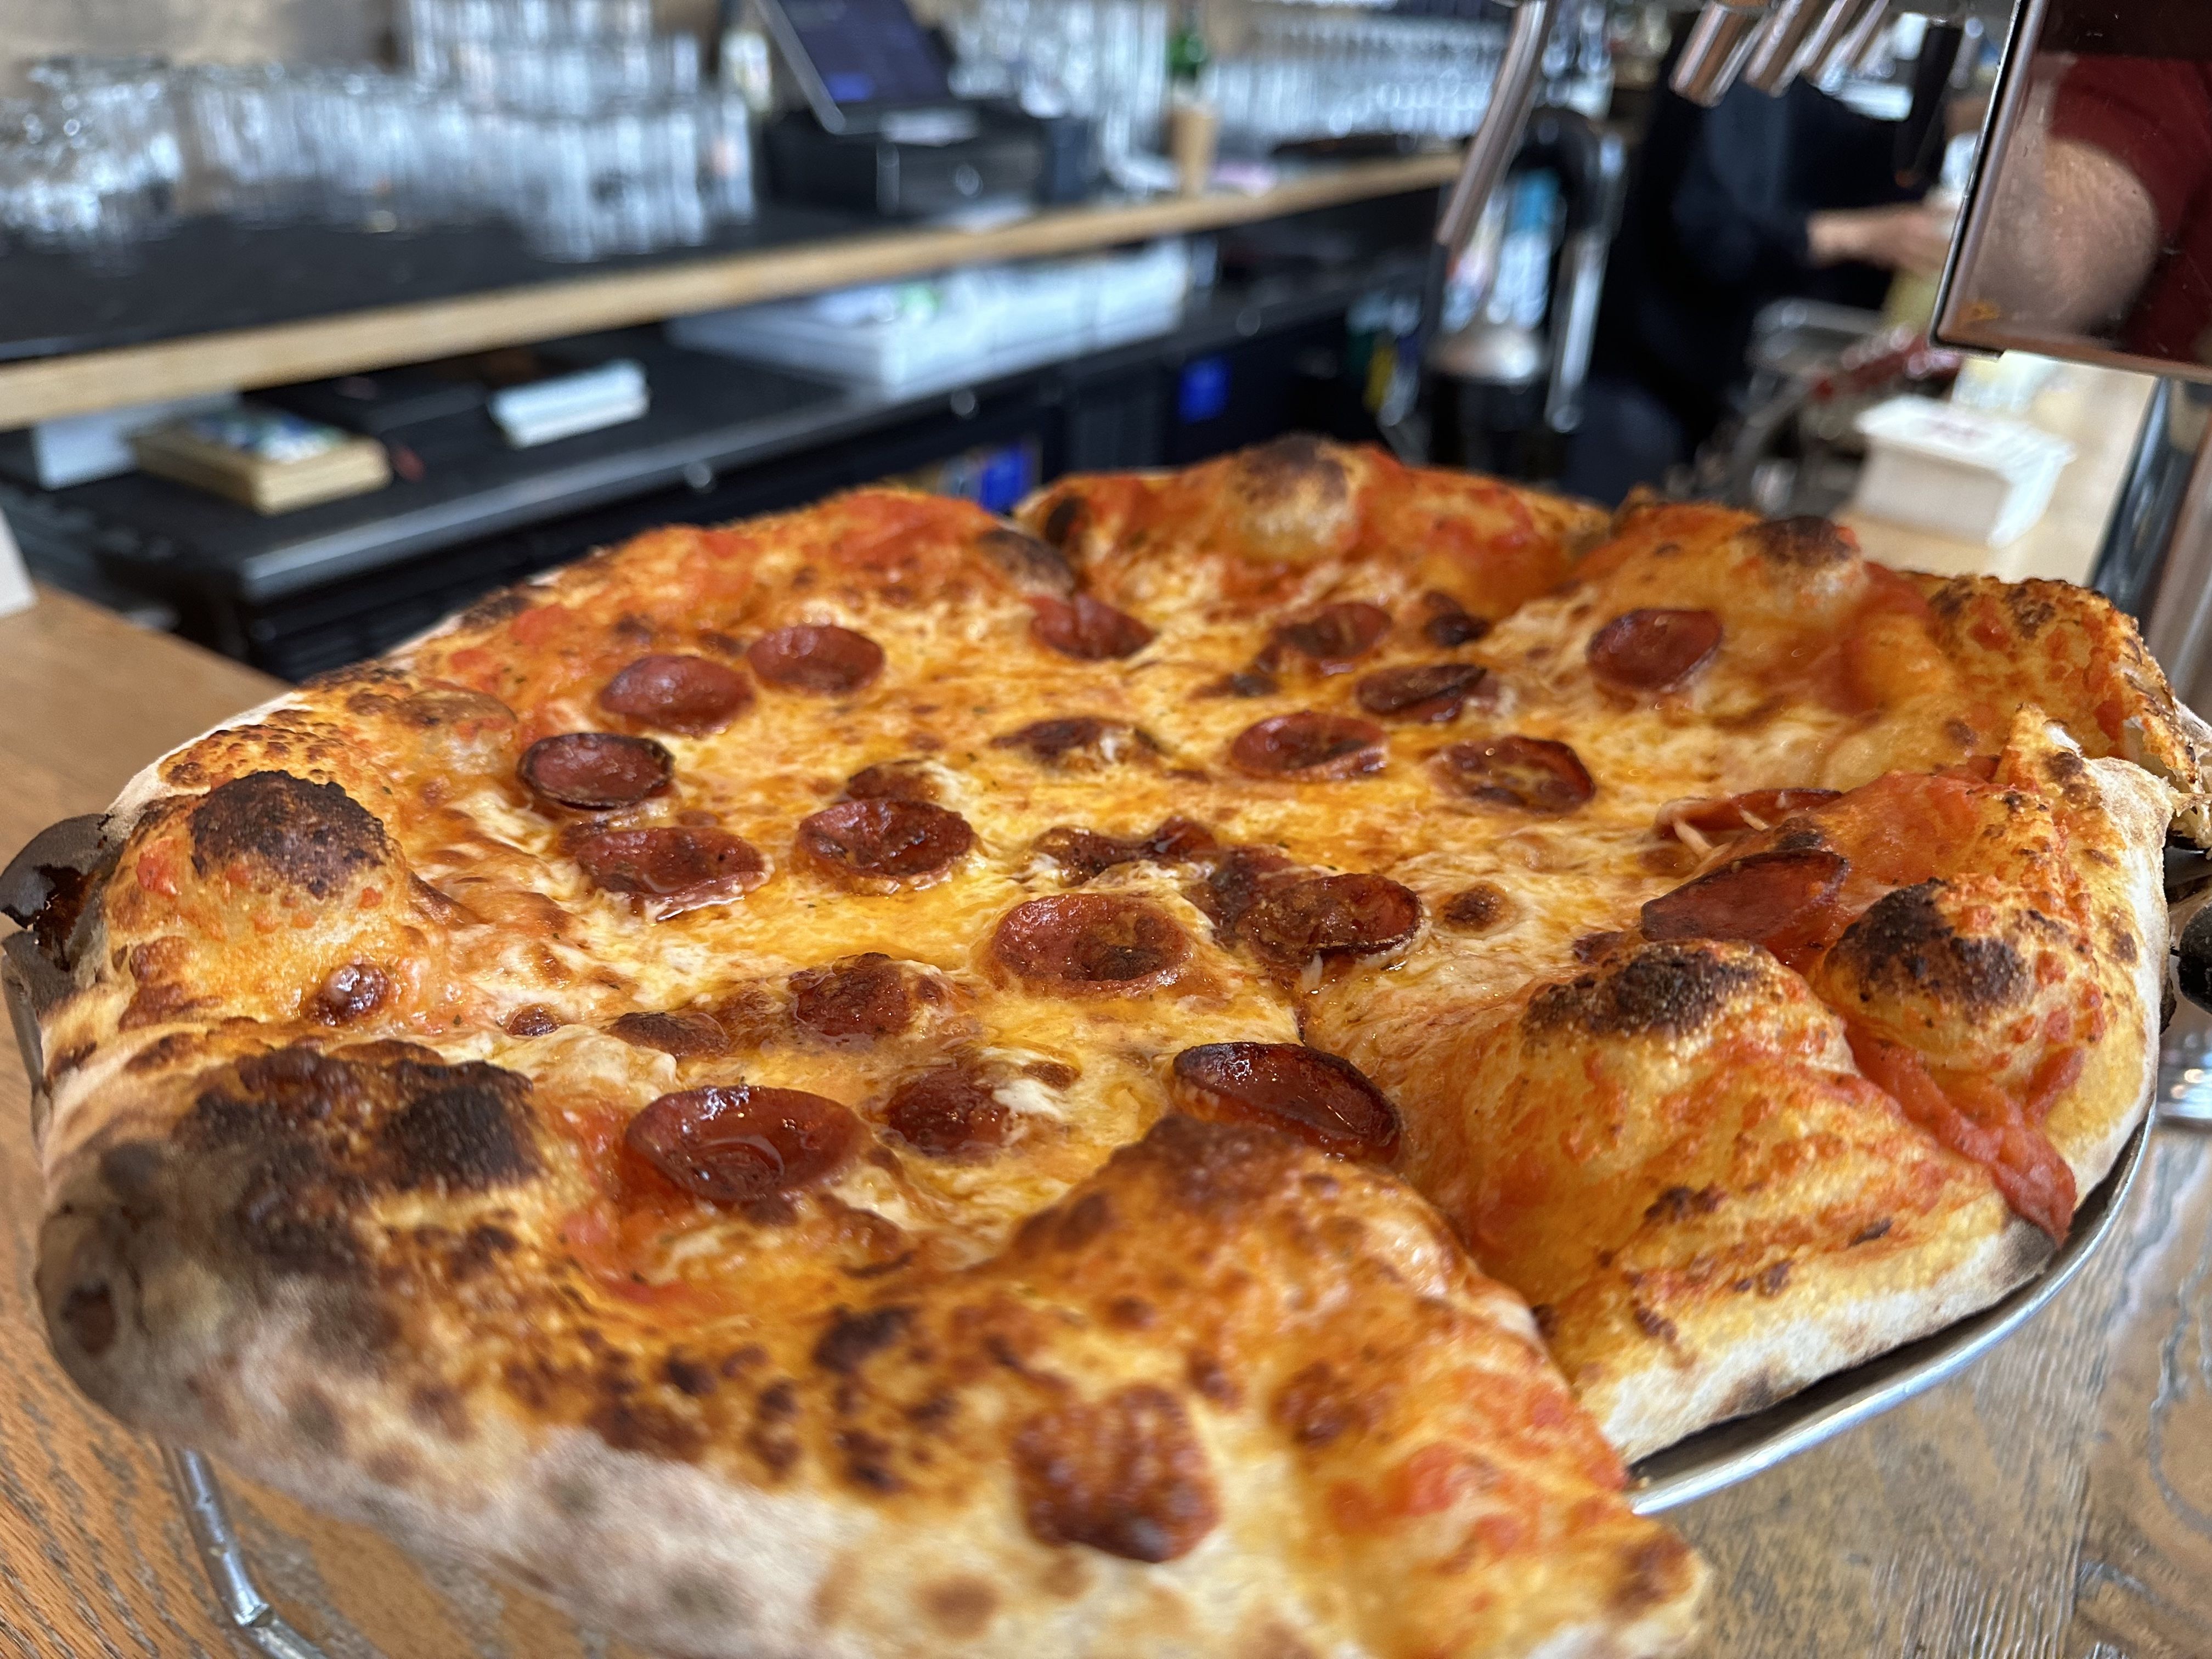 A pepperoni pie from Area4 in Cambridge.